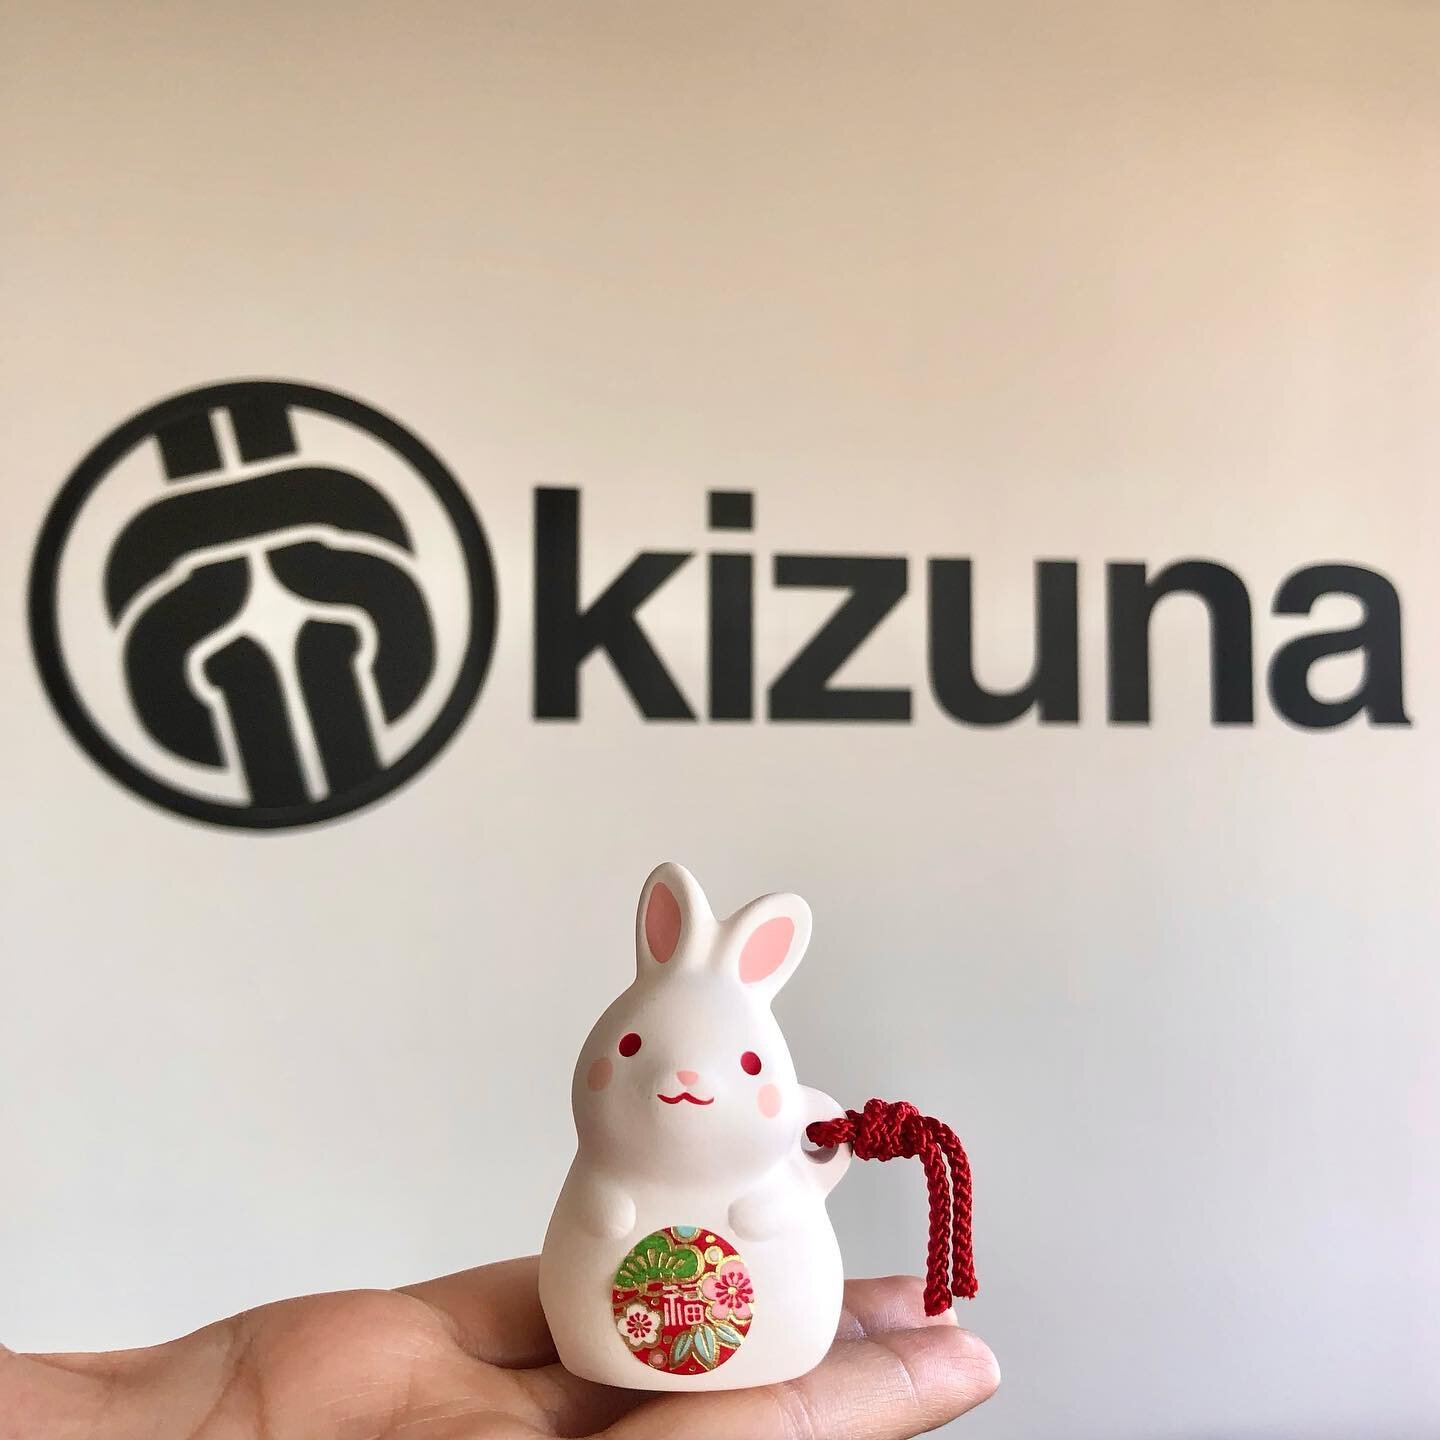 𝐇𝐚𝐩𝐩𝐲 𝐋𝐮𝐧𝐚𝐫 𝐍𝐞𝐰 𝐘𝐞𝐚𝐫 to our friends who celebrate it!🧧 Whether it's year of the rabbit or the cat, Kizuna turns 12 this year!🐇🐈 We're wishing you lots of luck and happiness in the year ahead.
&hearts;️🏮&diams;️